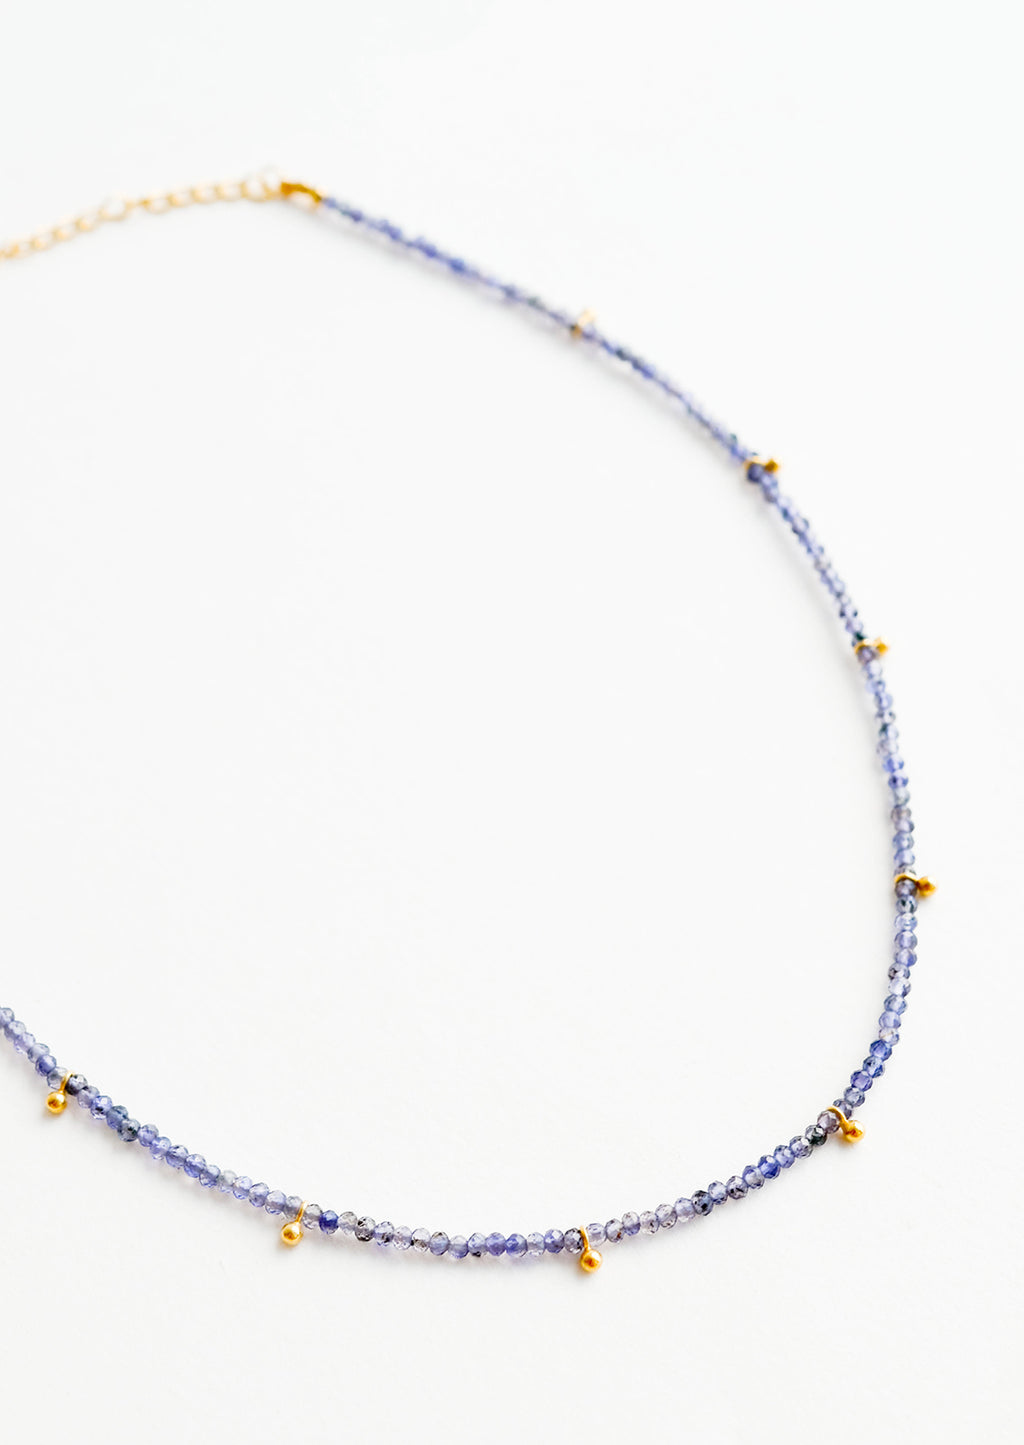 Iolite: A necklace of deep blue stones with evenly spaced gold beads and a golden chain clasp.